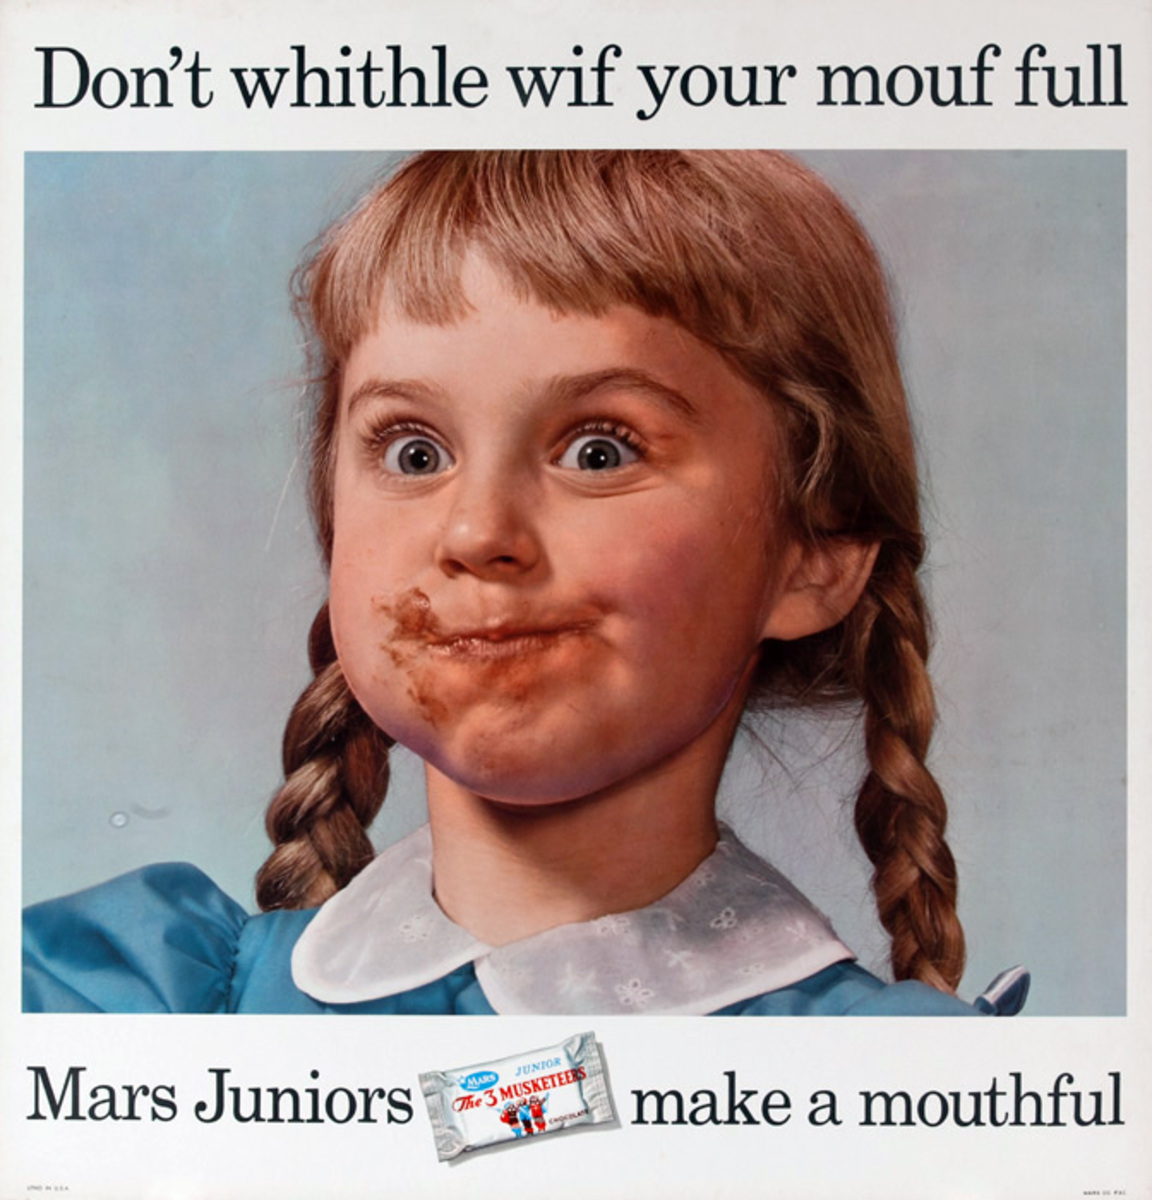 Mars Candy Original Advertising Poster, Don't Whithle wif your mouf full.